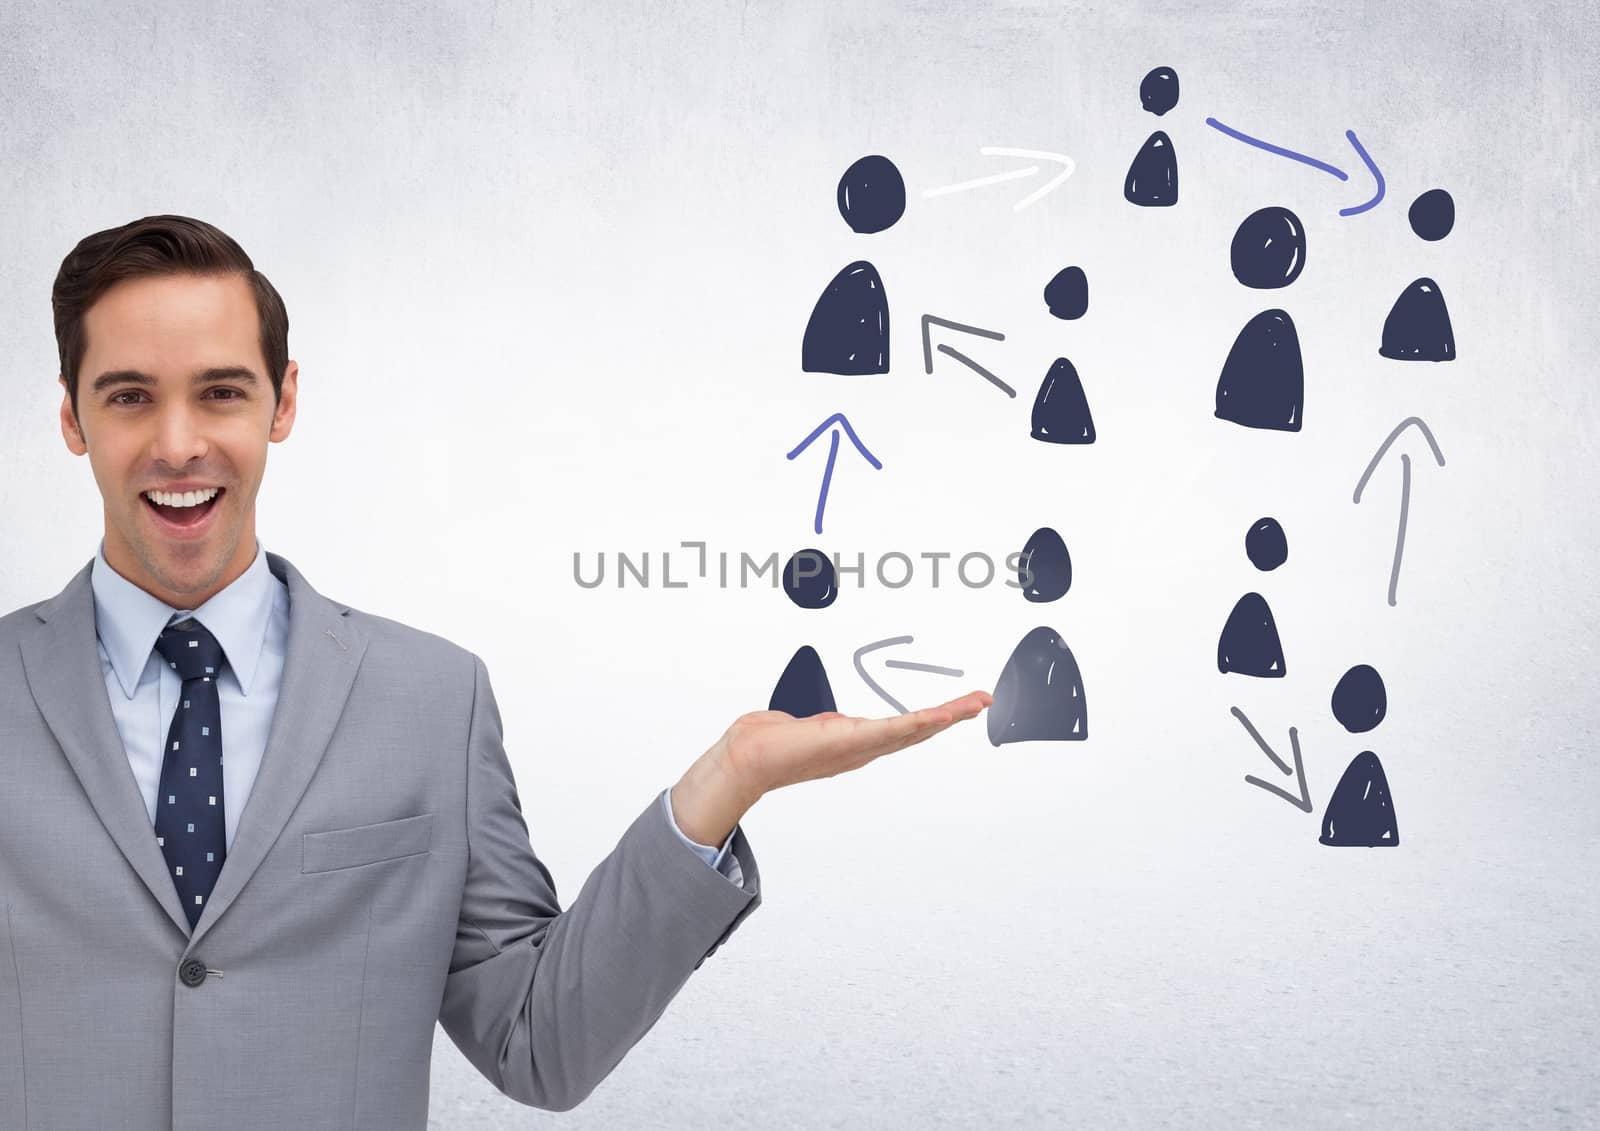 Digital composite of Hand-drawn people profile icons with open hand of businessman